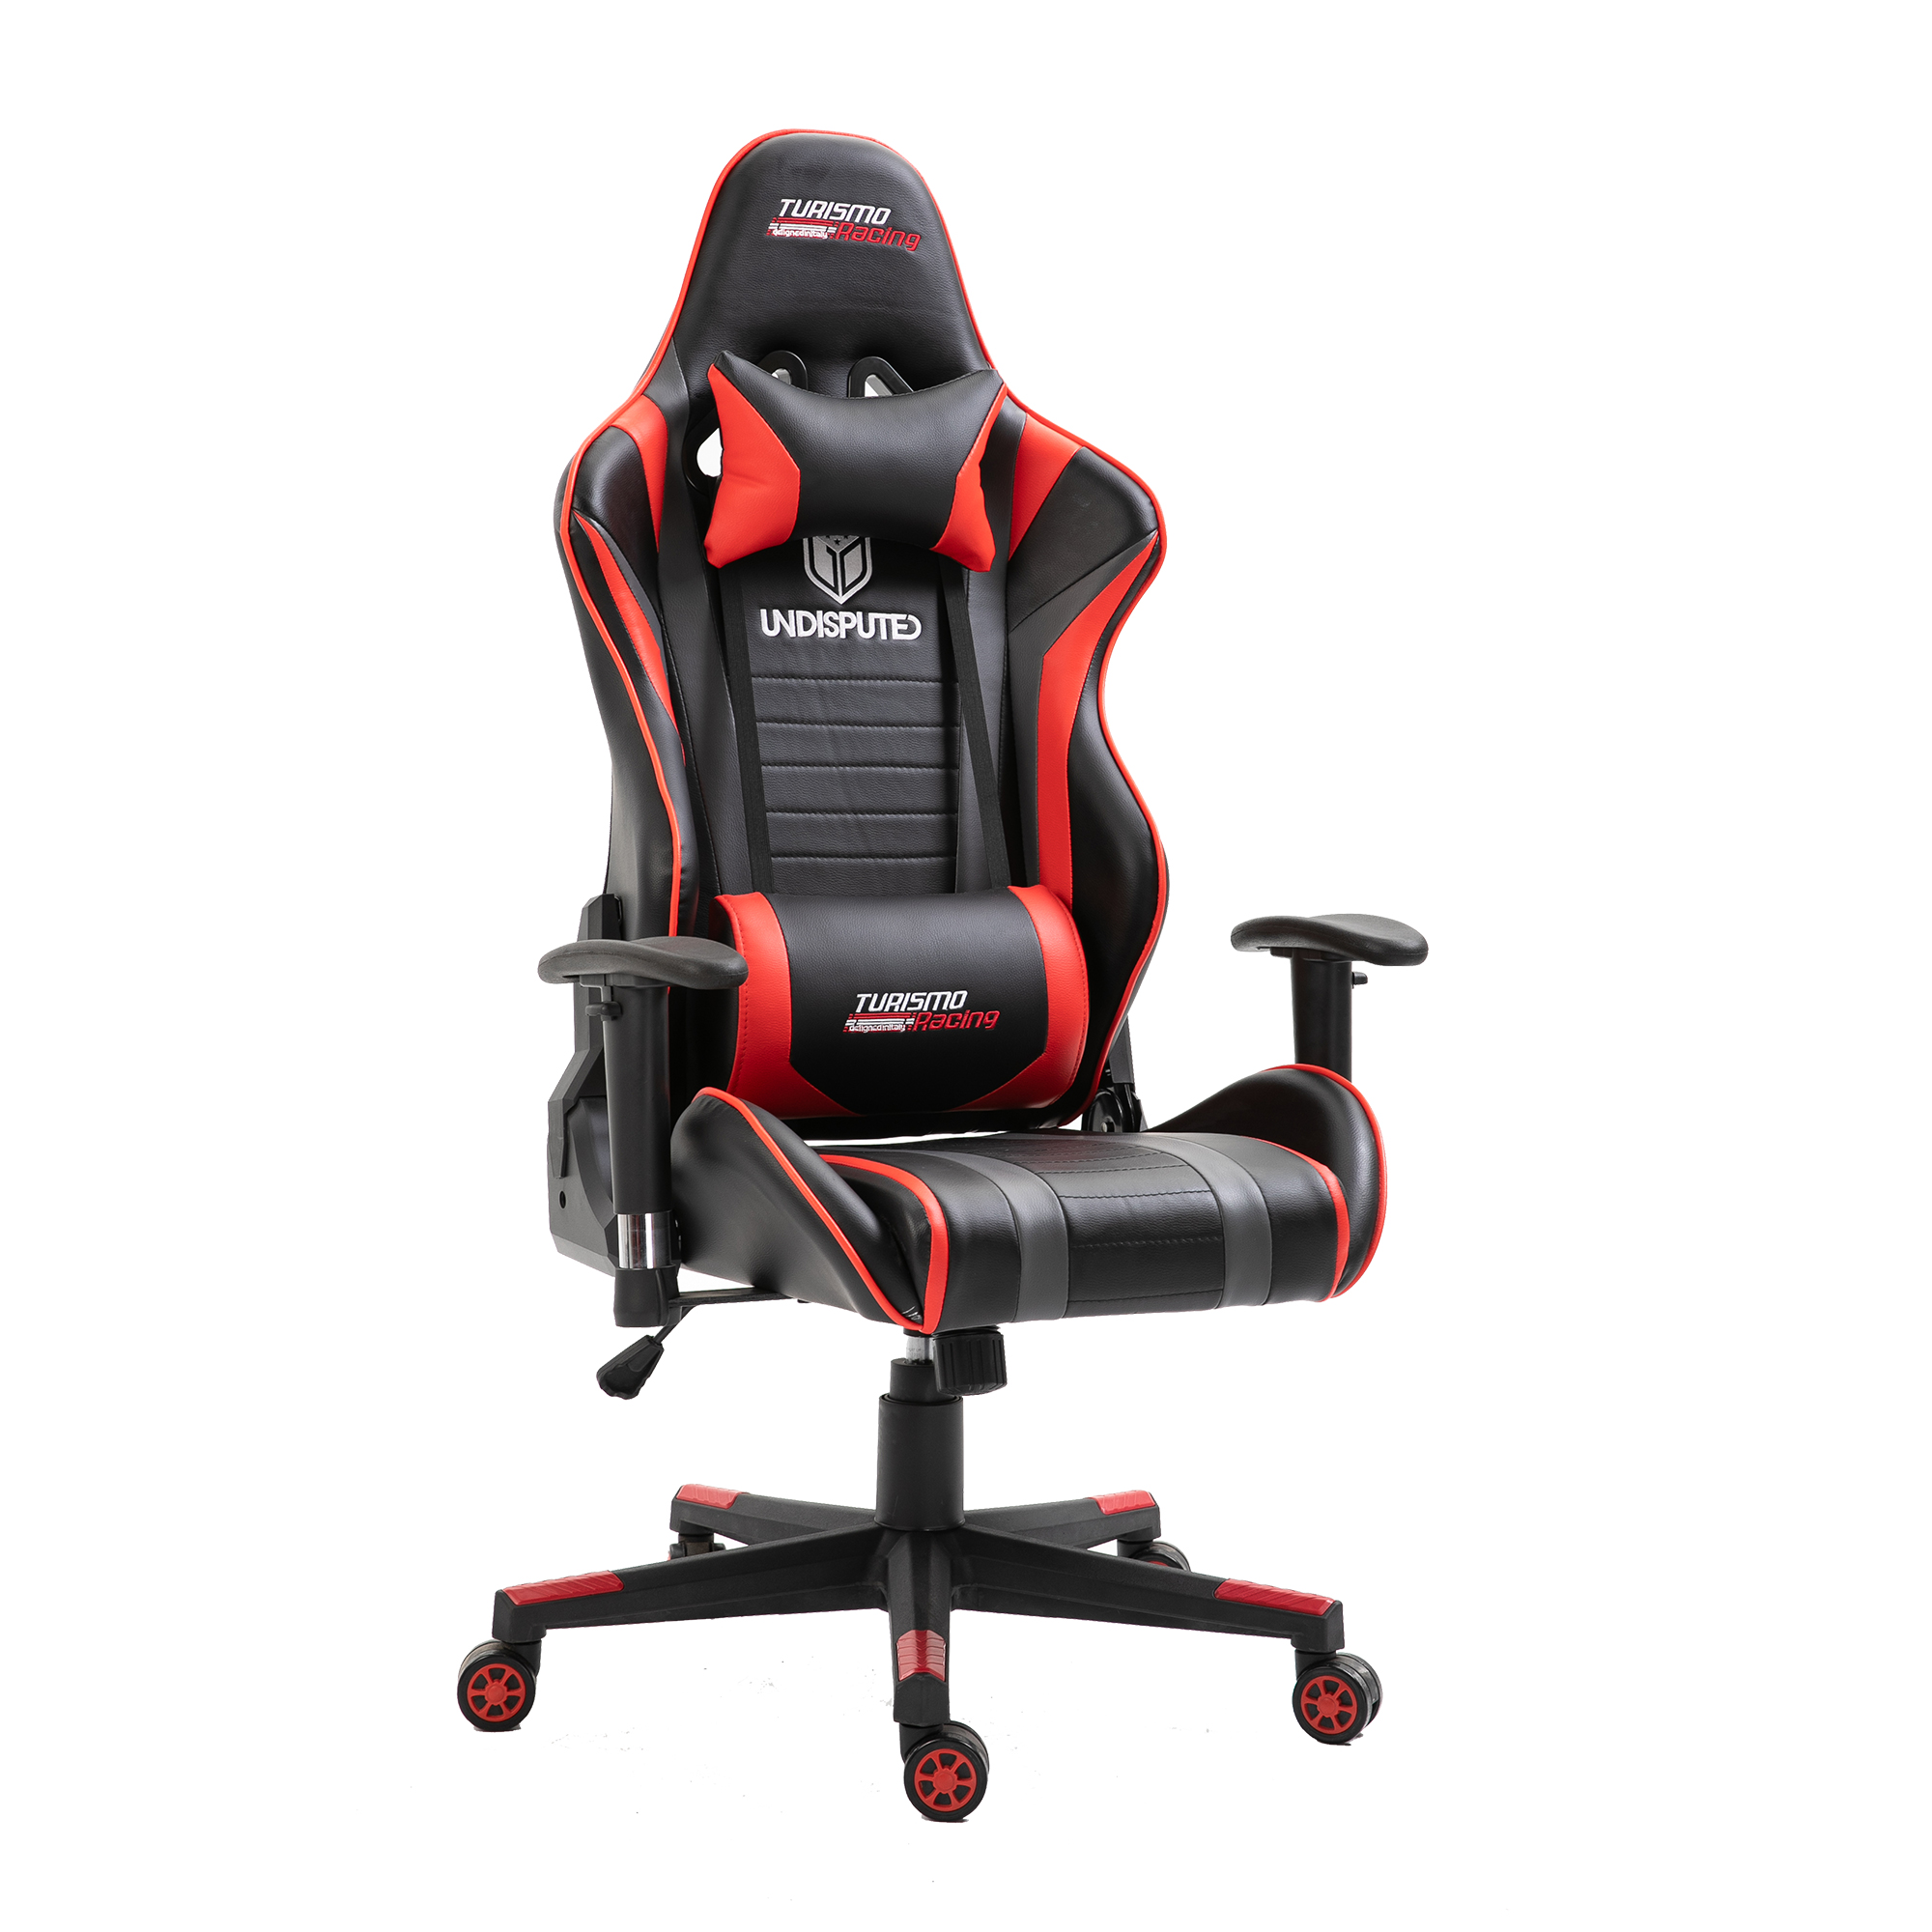 OEM High Quality Furgle Gaming Chair Factories –  High quality Ergonomic Silla Gamer luxury swivel cheap pu leather racing home PC computer office chair gaming chair – ANJI JIFANG